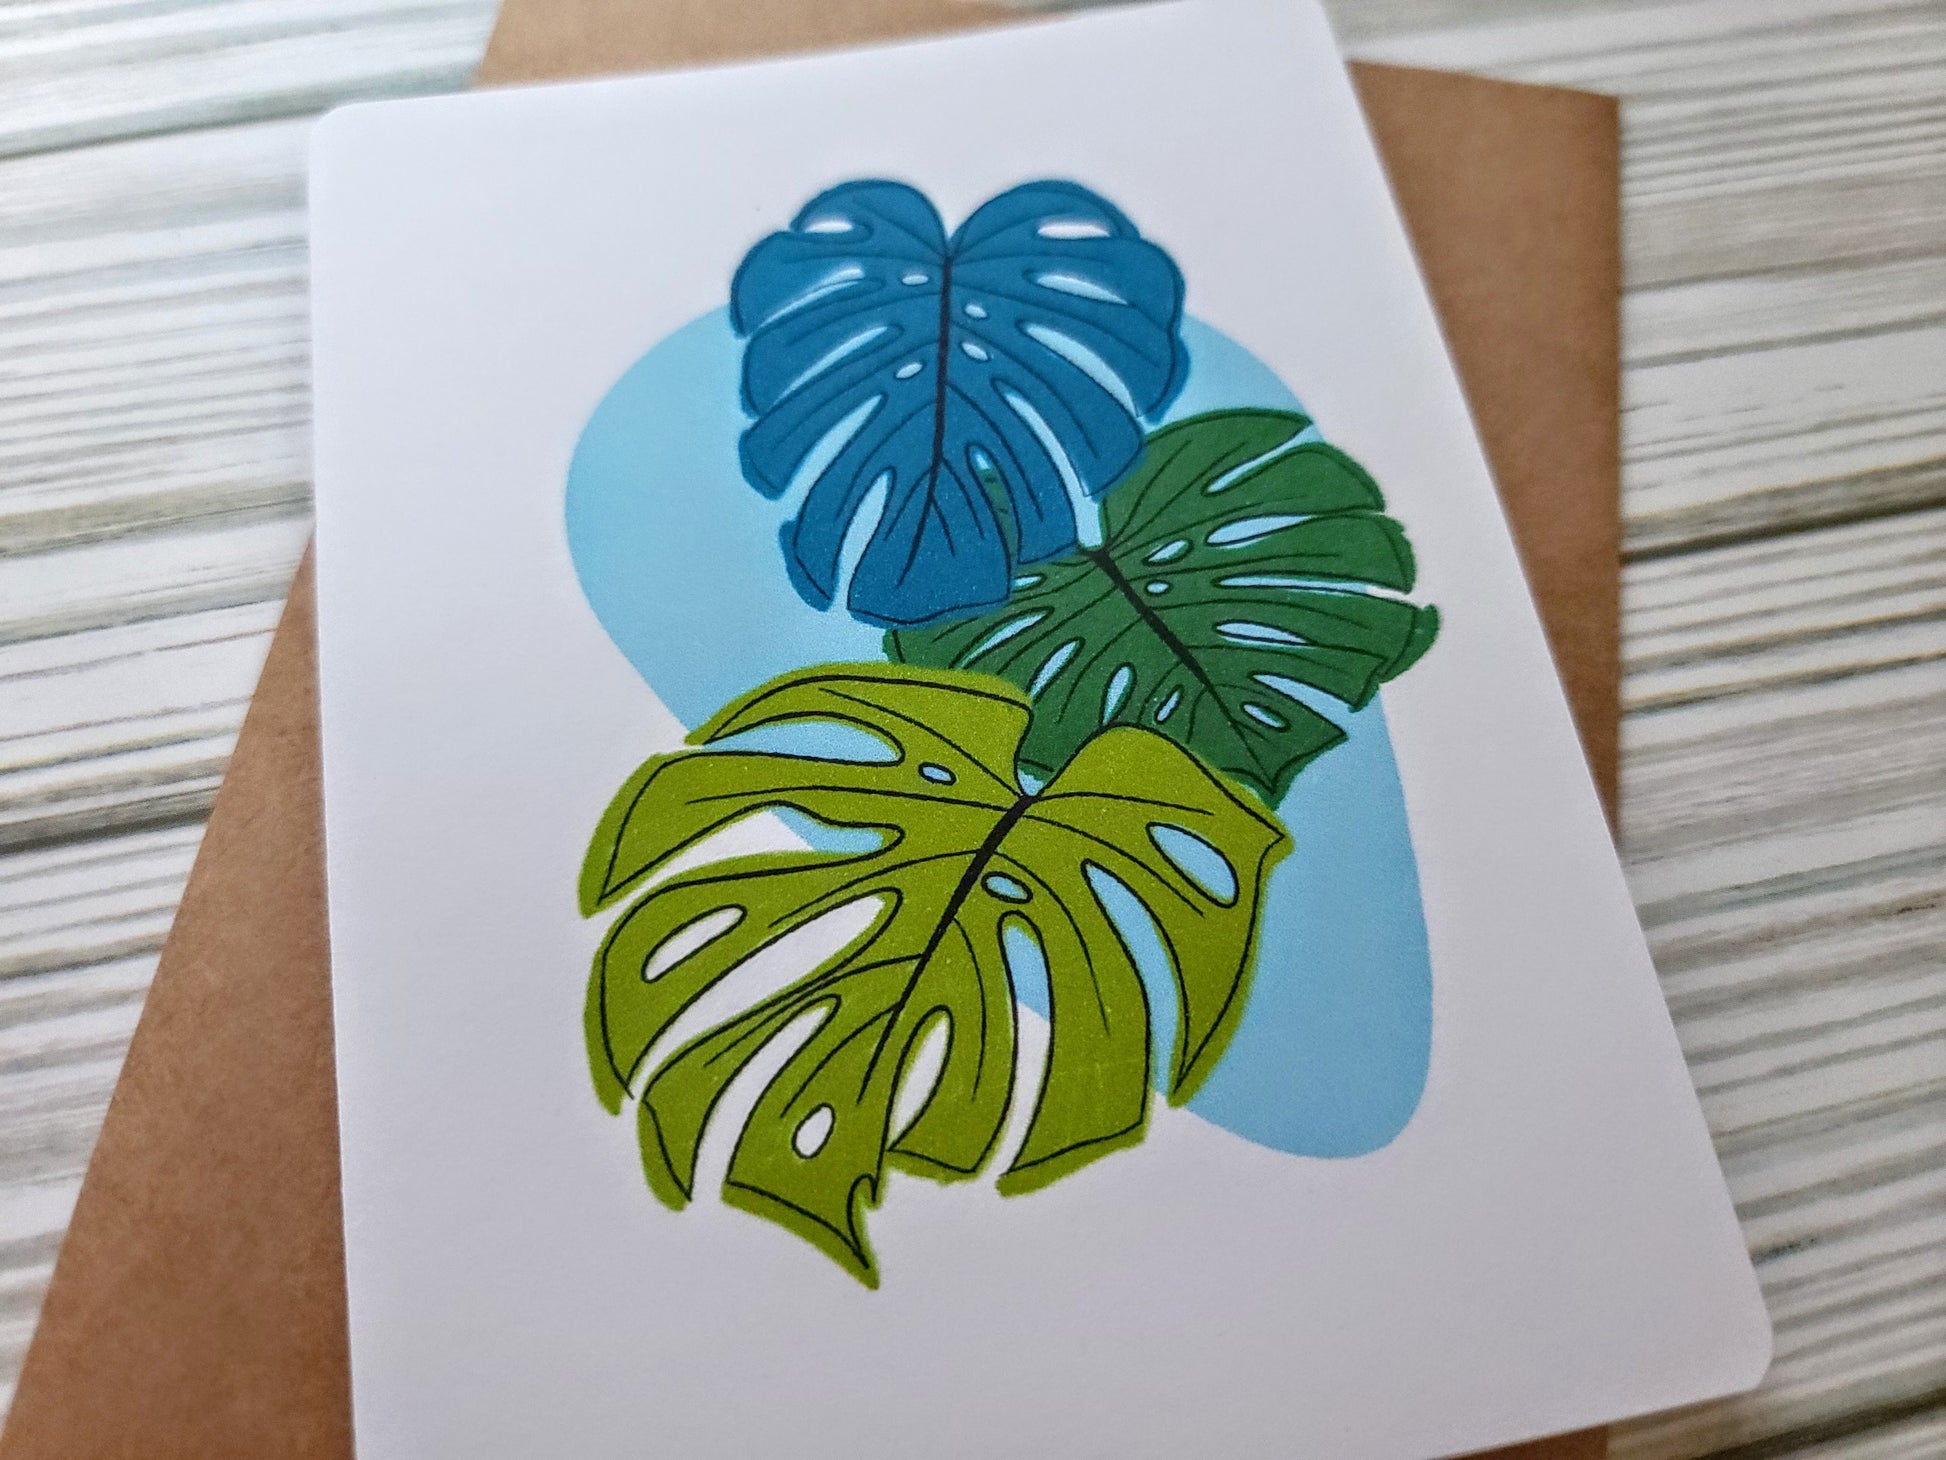 Monstera Leaves Handmade Greeting Card - Recycled Paper and Kraft Envelope - Angled Overhead Shot